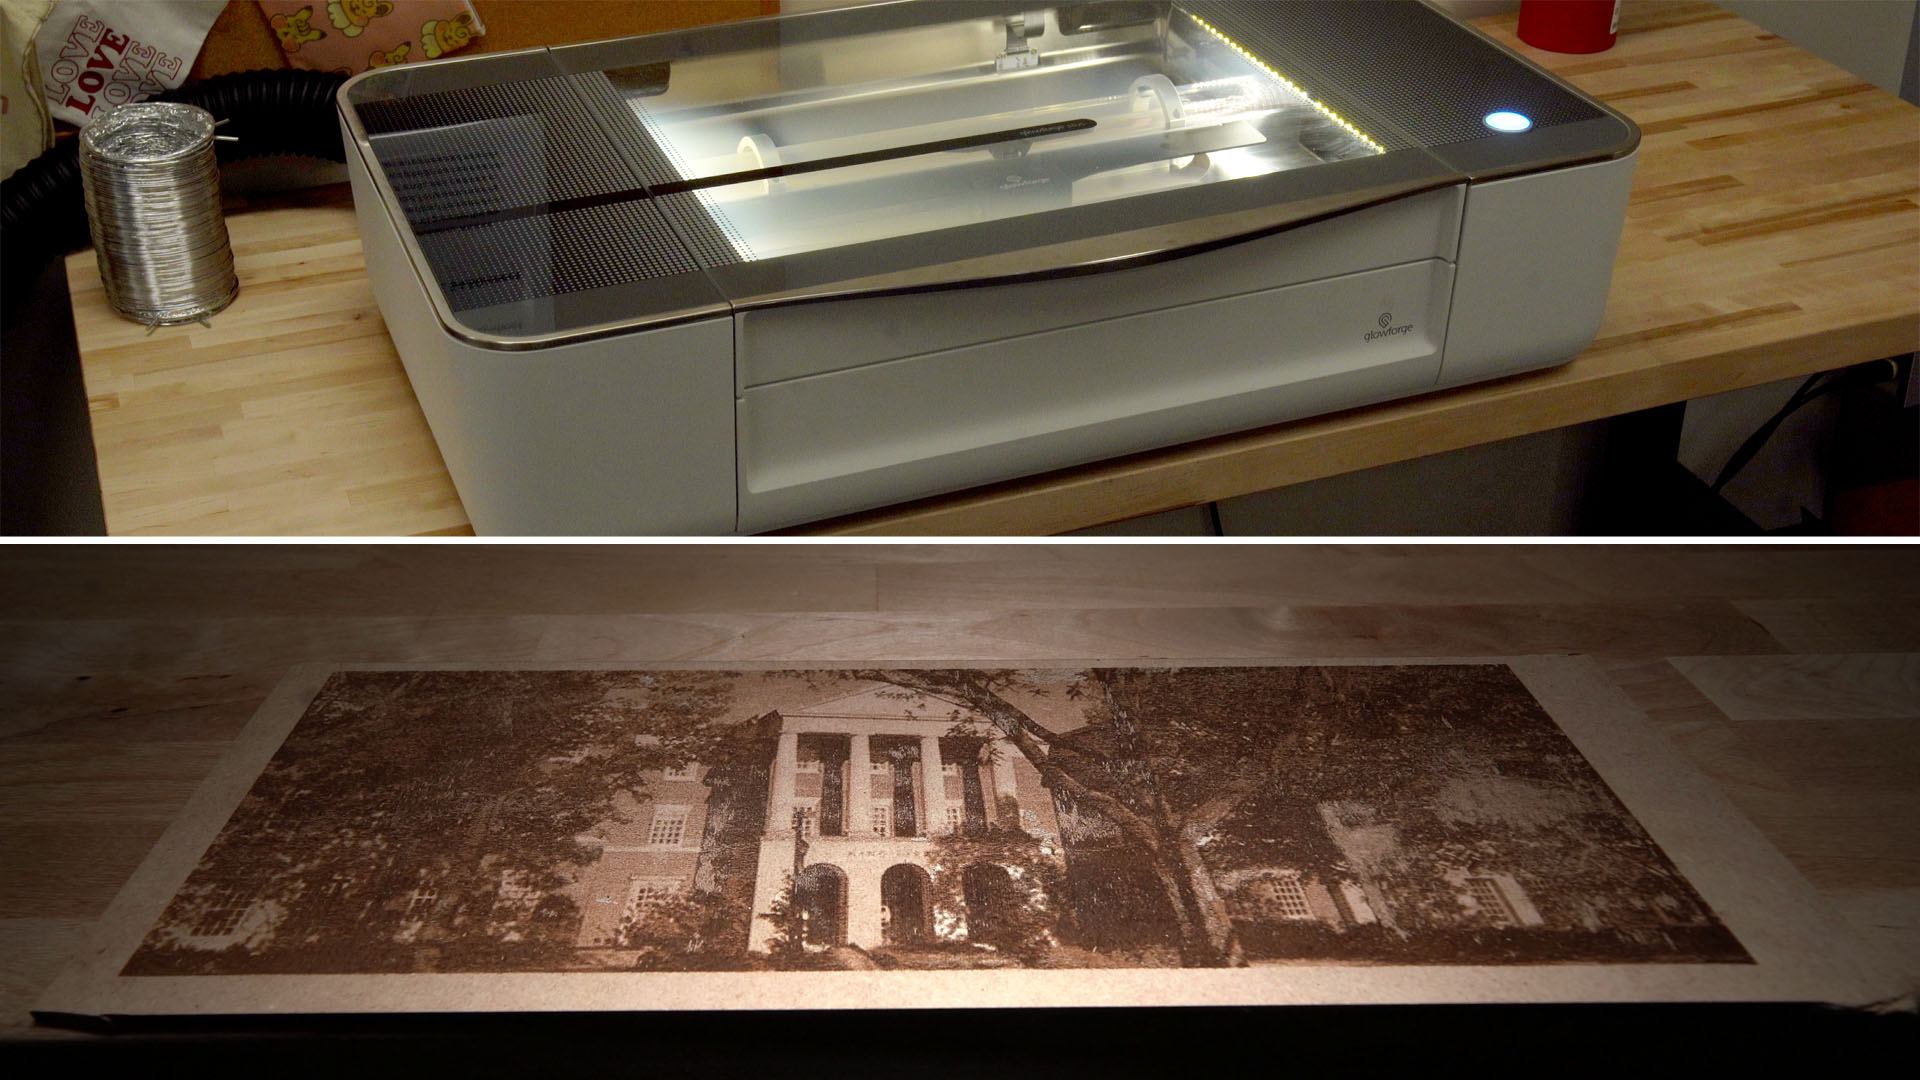 Two photographs: a Glowforge laser cutter/engraver sitting on a table in the Libraries Makerspace, and a piece of wood with an image of King Library engraved on it by the laser engraver.